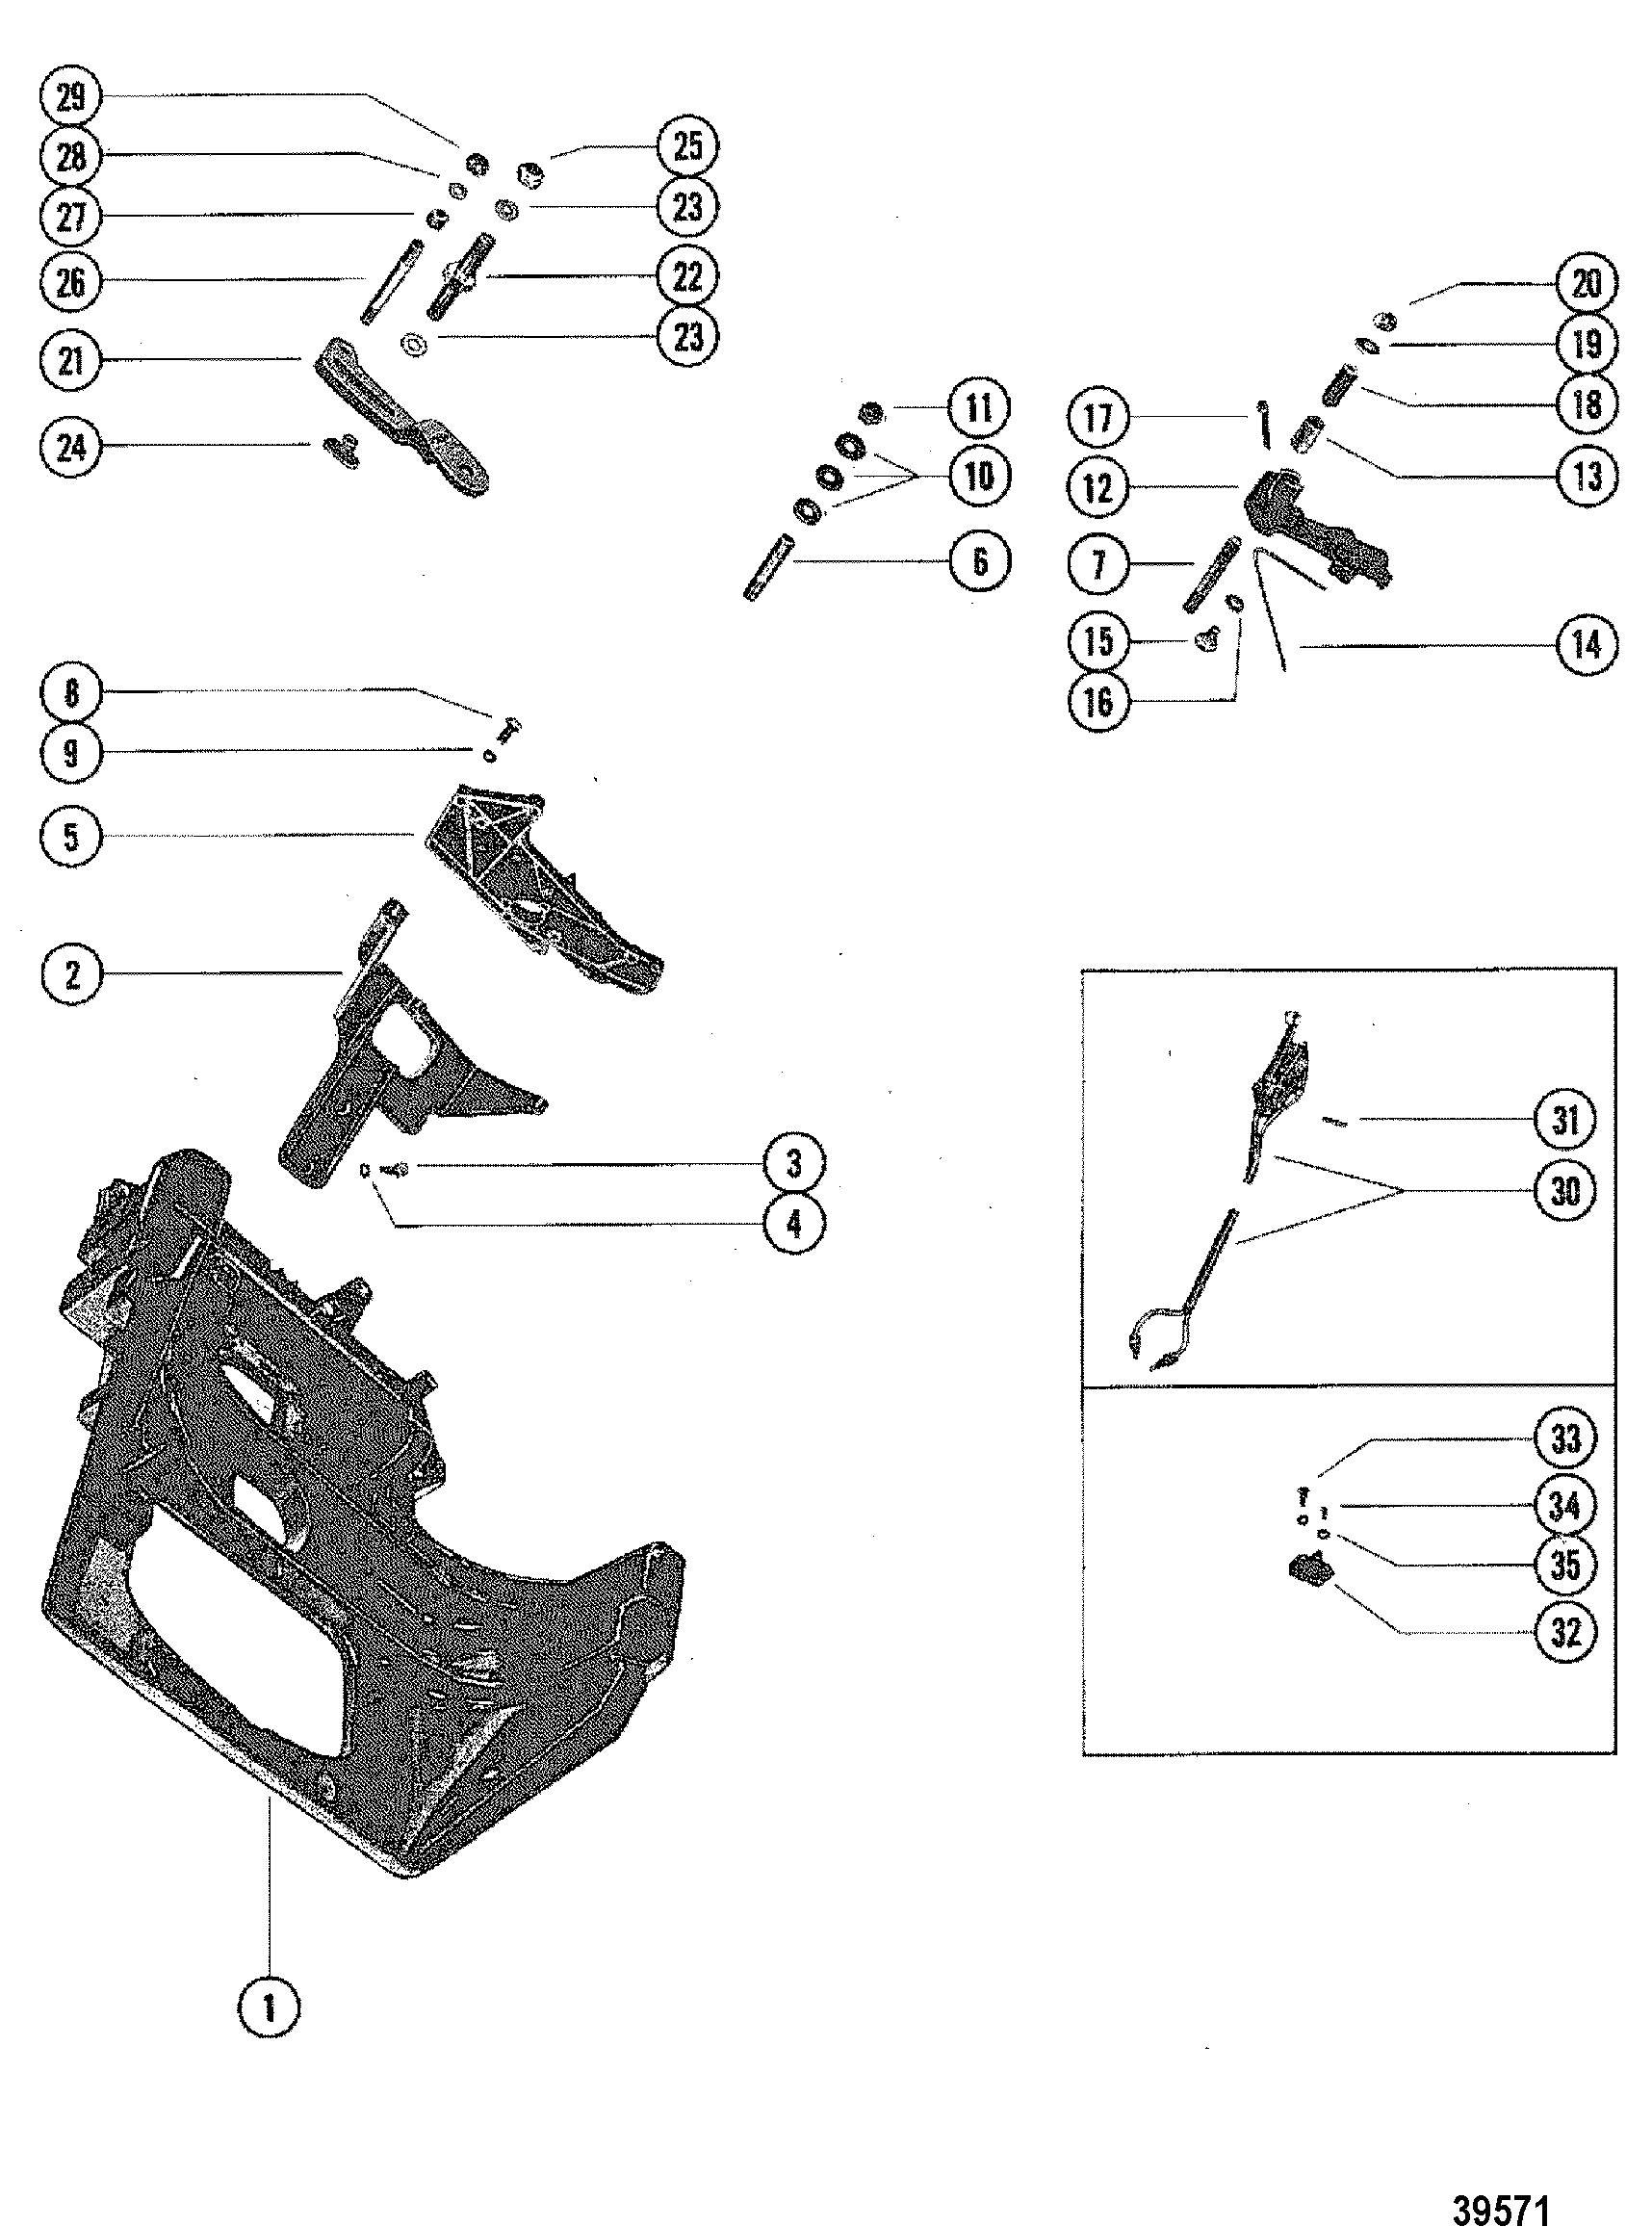 TRANSOM PLATE AND SHIFT LEVER(IN-LINE ENGINES)